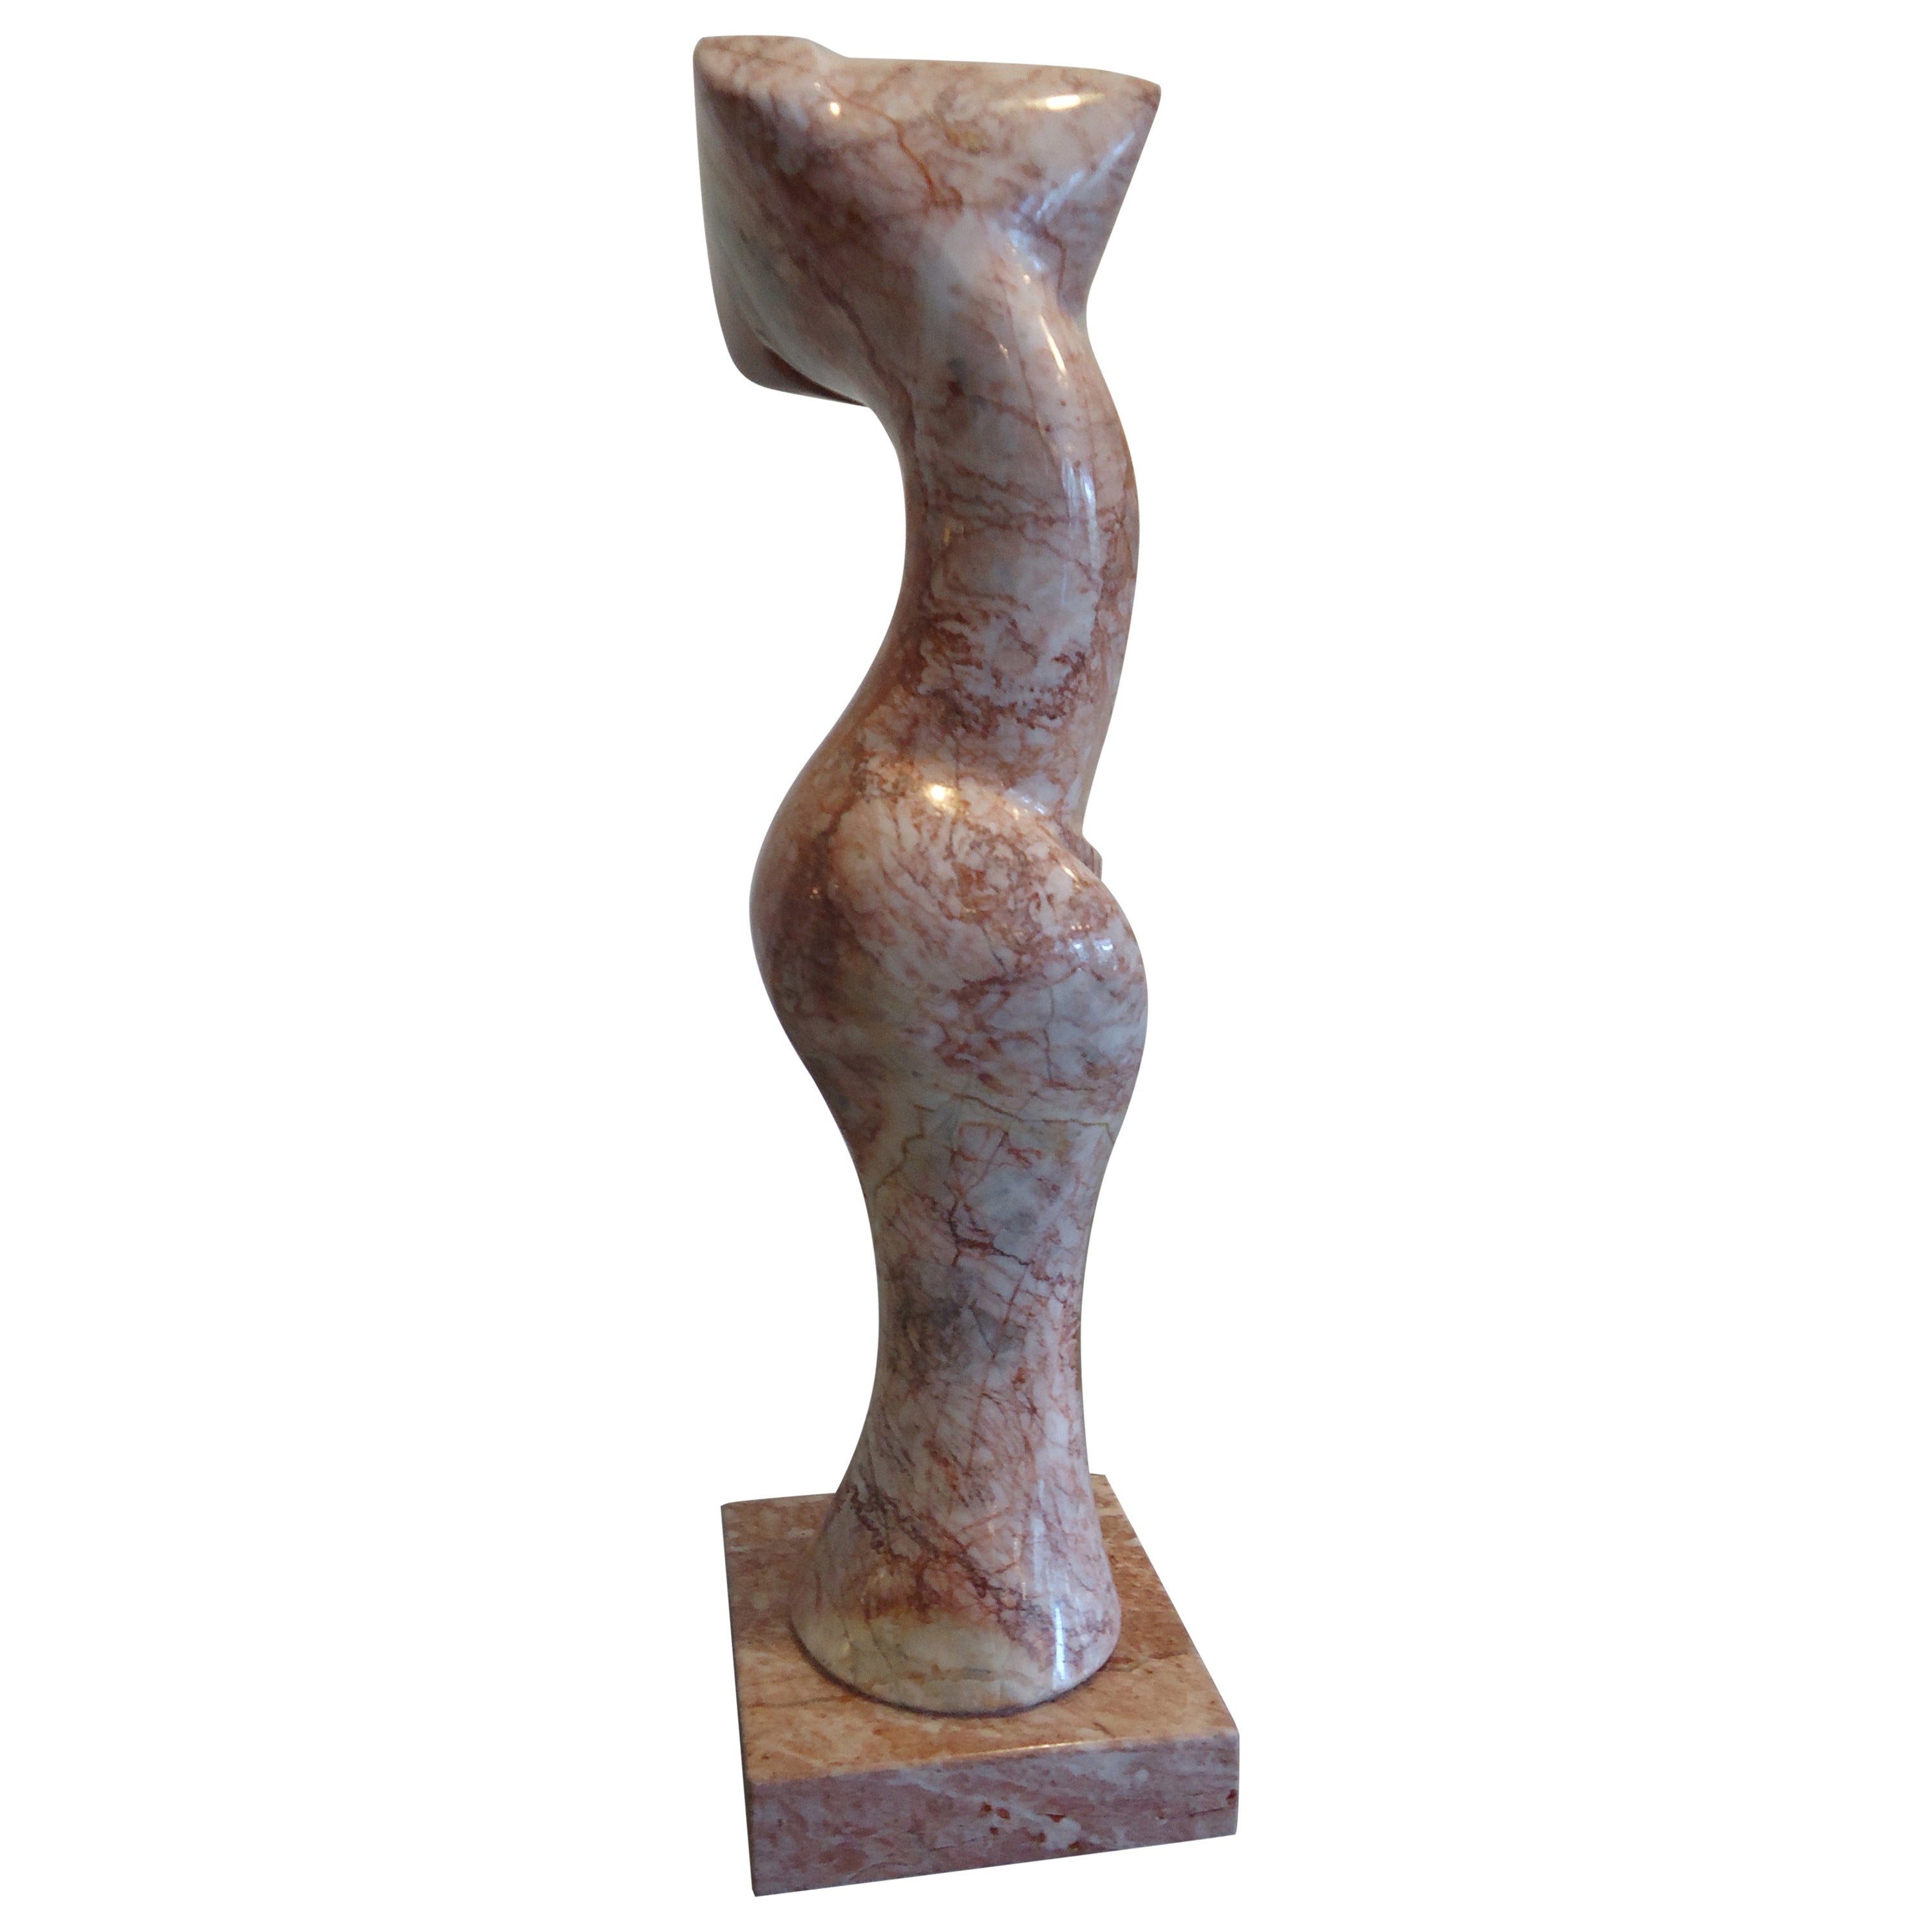 Sensual Rouge Marble Abstract Sculpture of Nude Female Figure